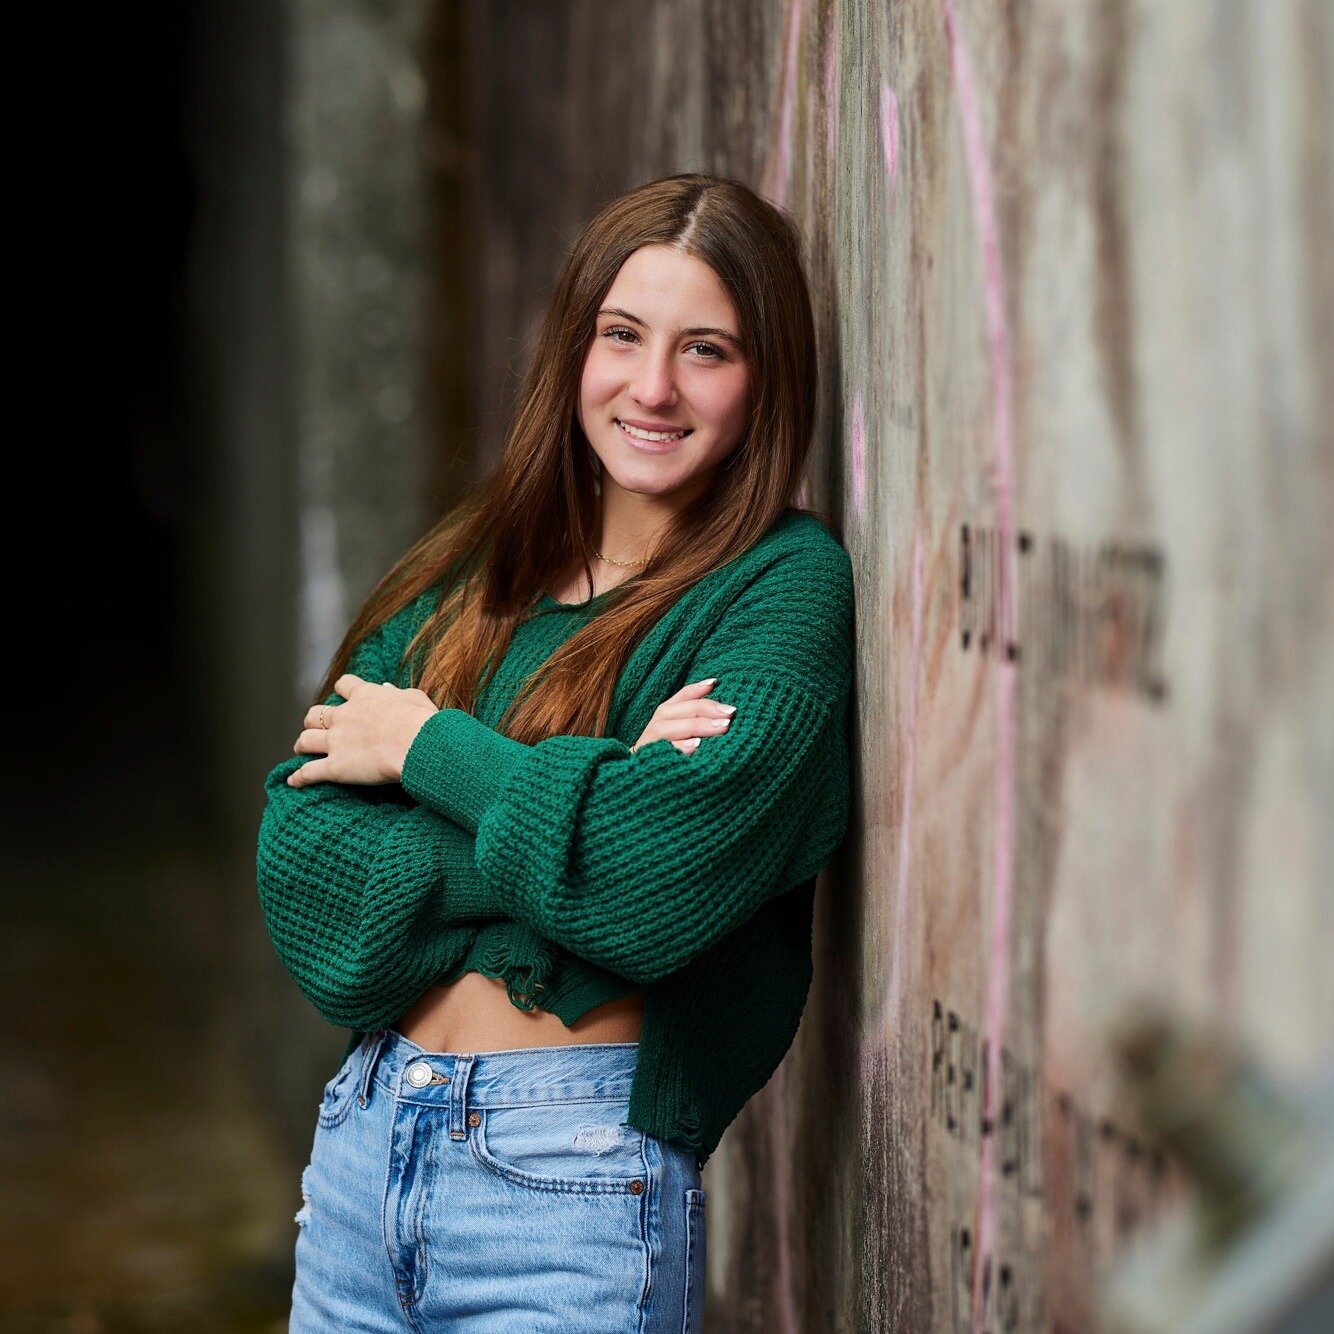 Check out these beautiful previews of A.J! Our first shoot for the class of 2024! Now booking Senior Sessions for 2024 &amp; 2025. Limited bookings available.
Allie | 2024